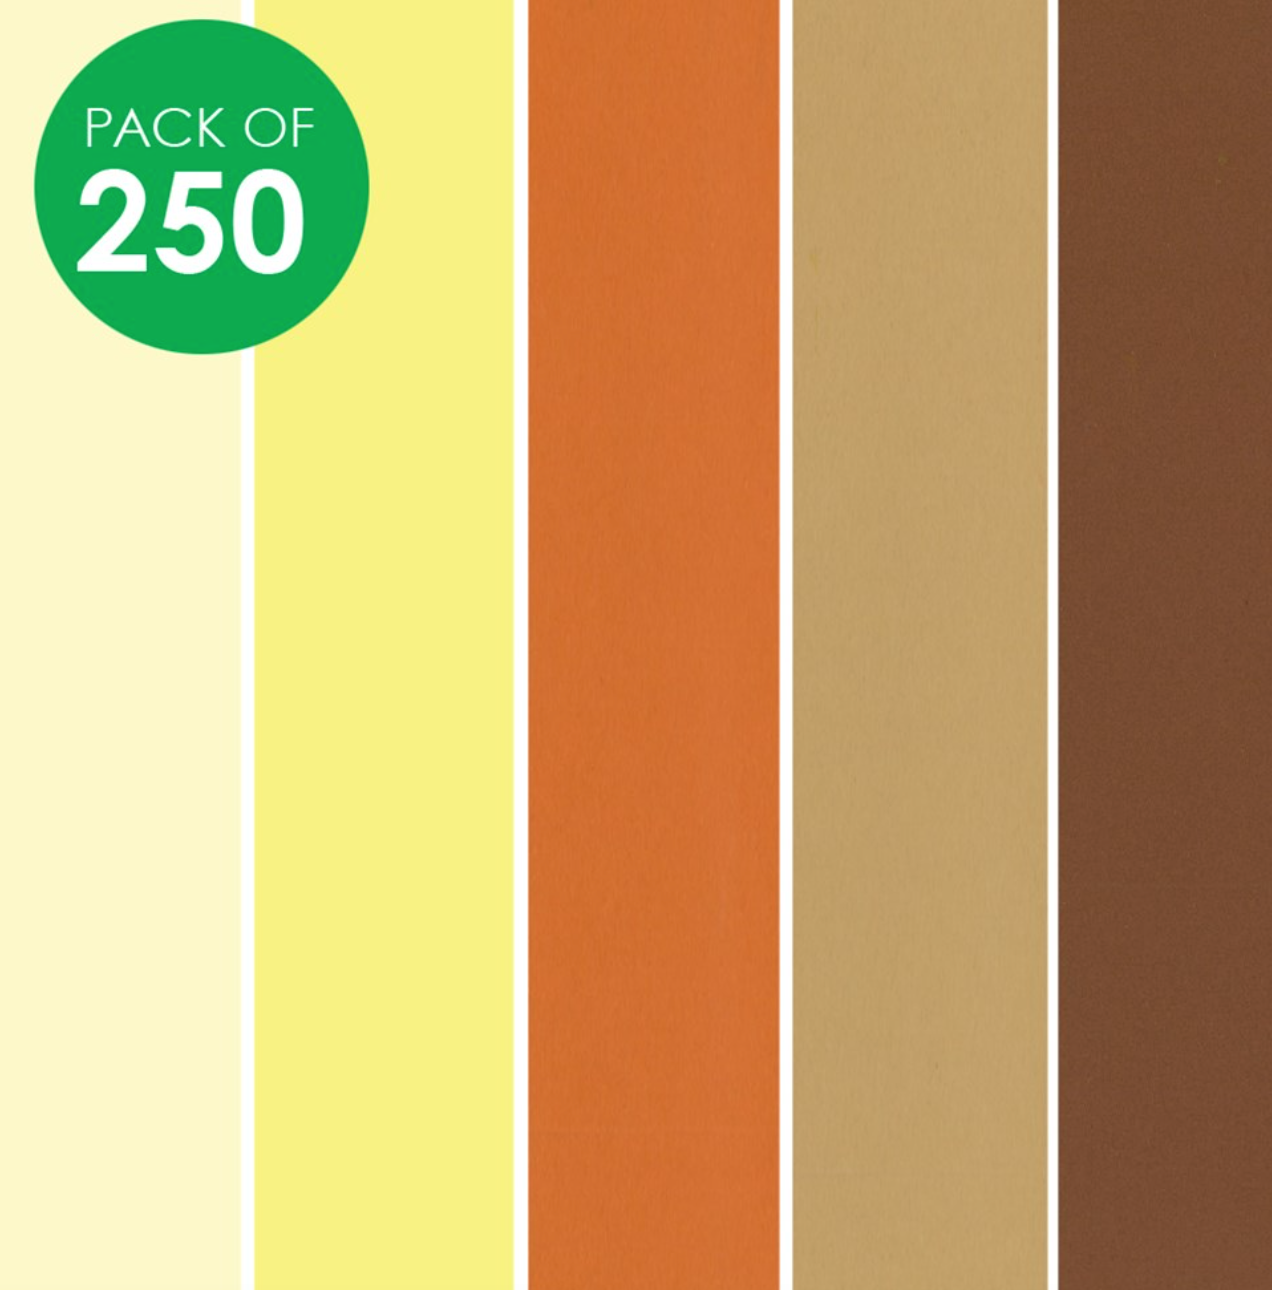 Cover Paper - Skin Tones - A4 - Pack of 250